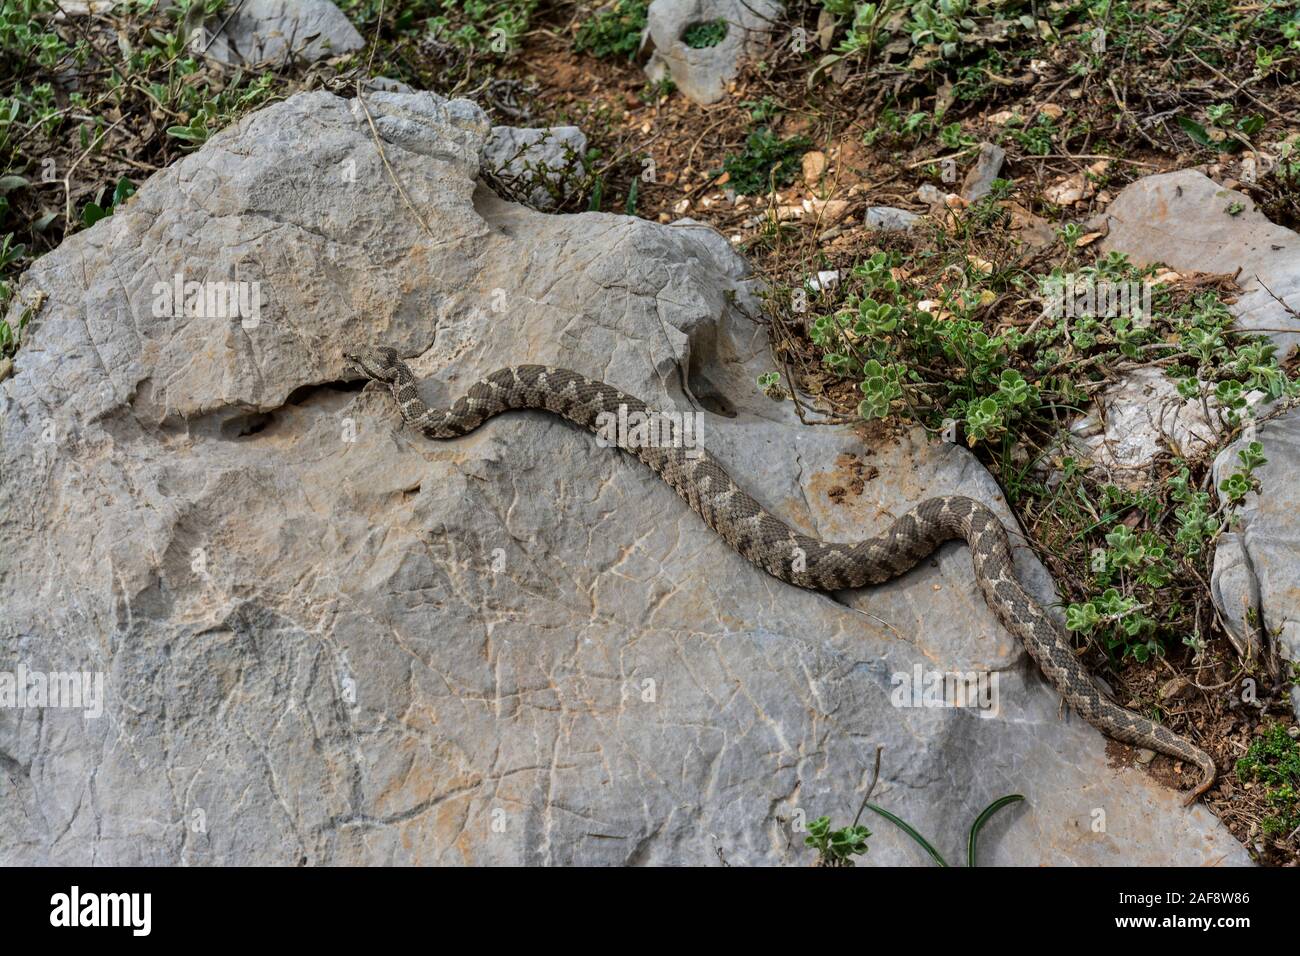 The Viper that roams on the stones Stock Photo